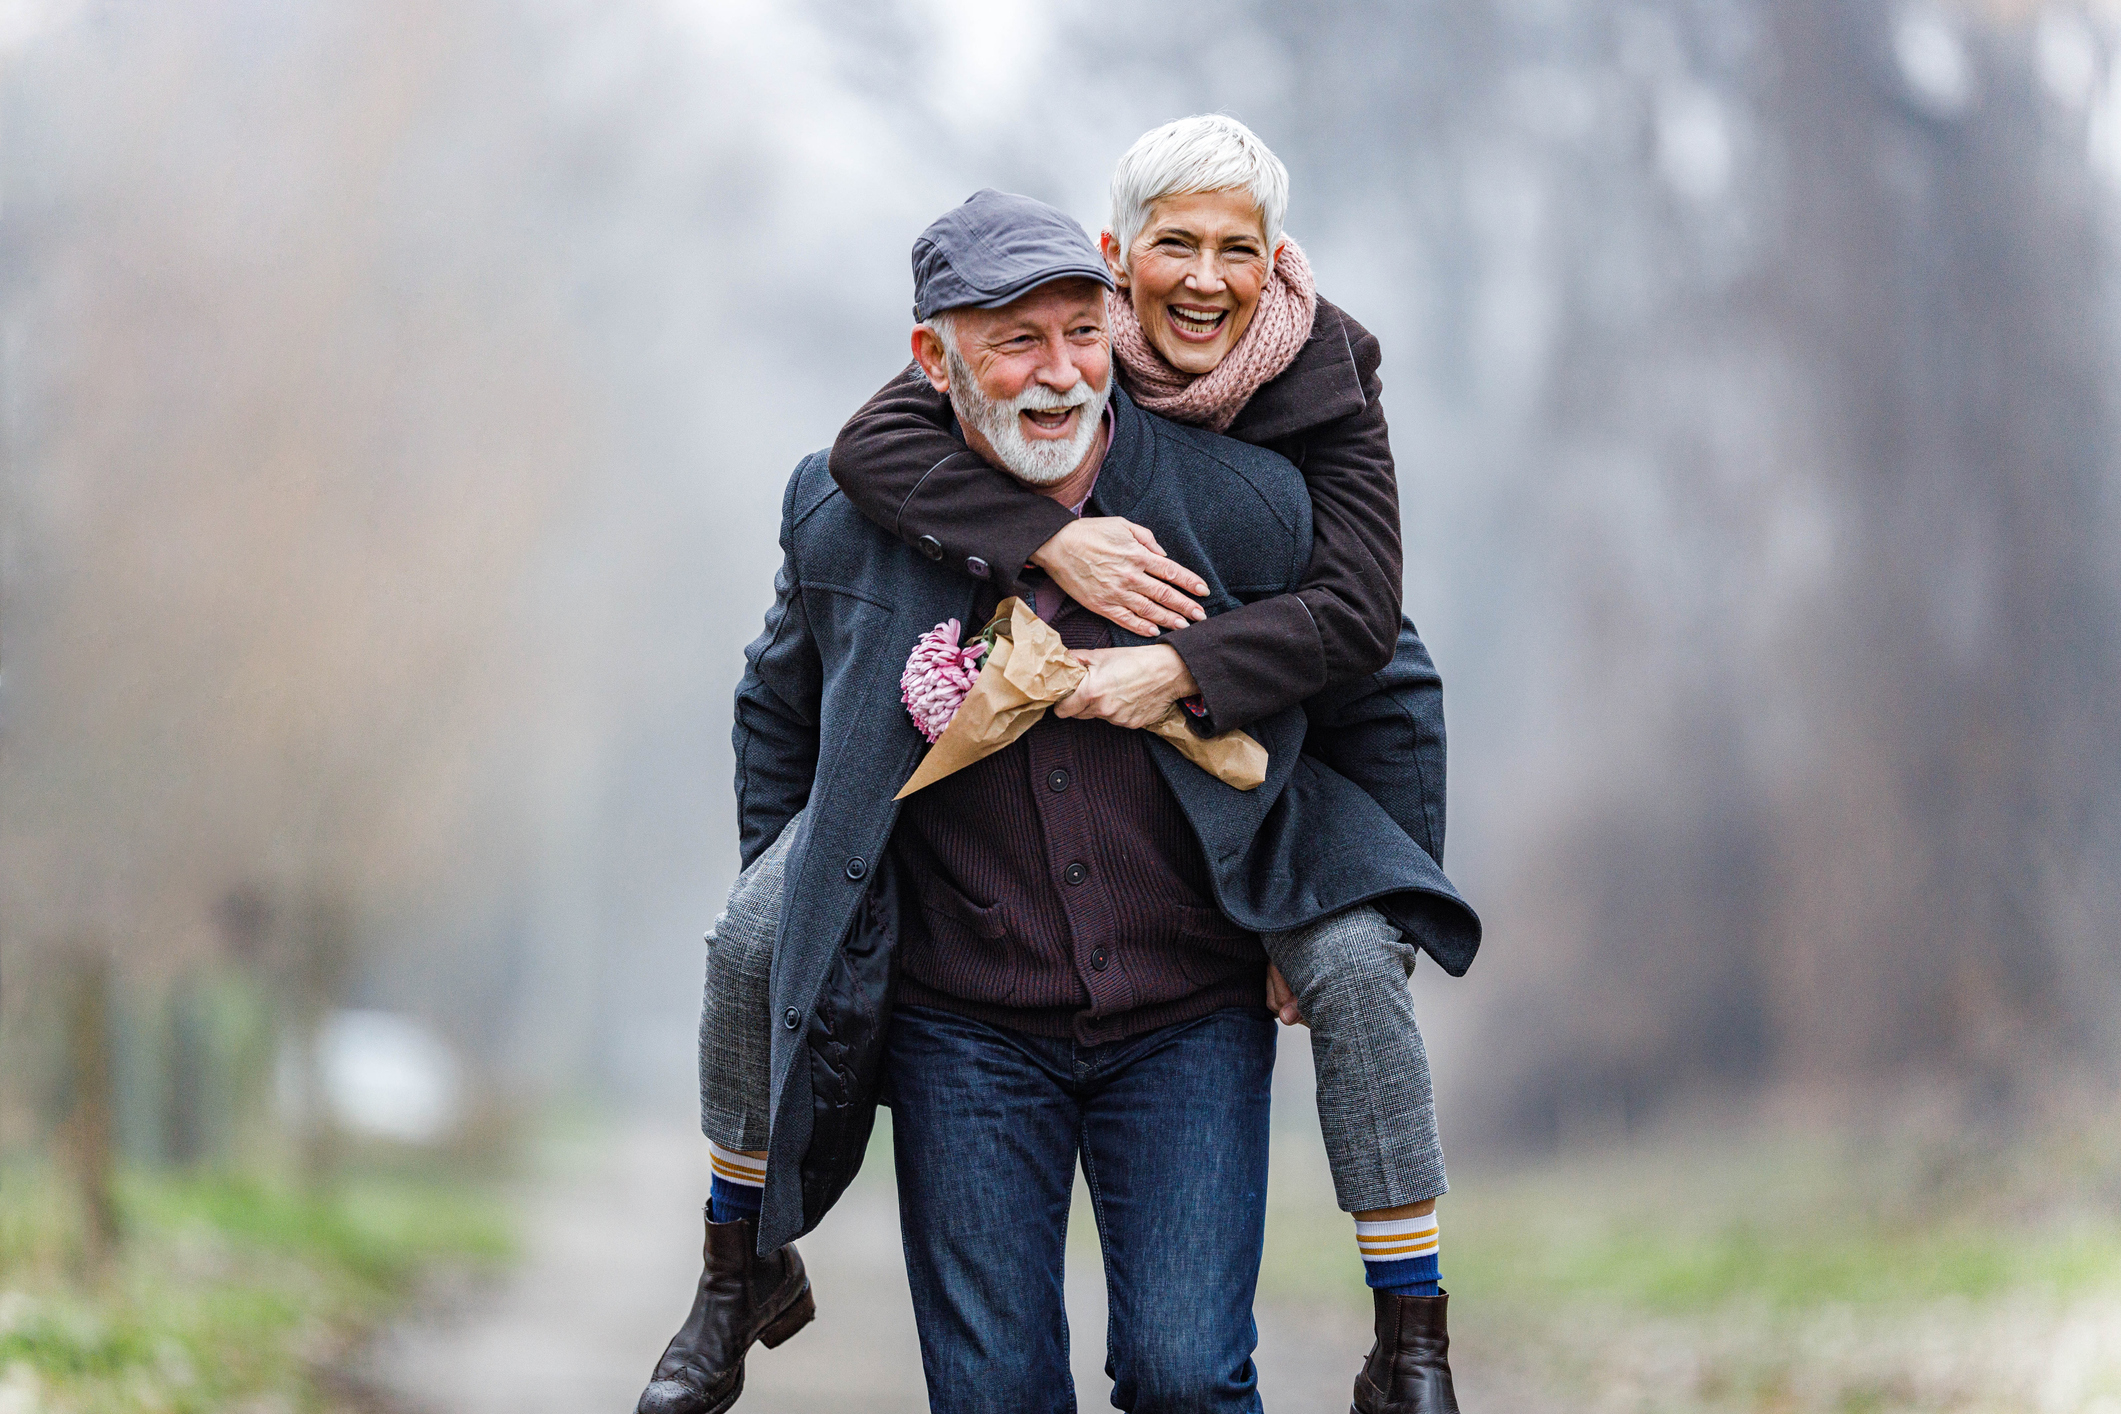 An older man gives a piggyback ride to a laughing woman, both dressed warmly for fall, sharing a joyful moment outdoors